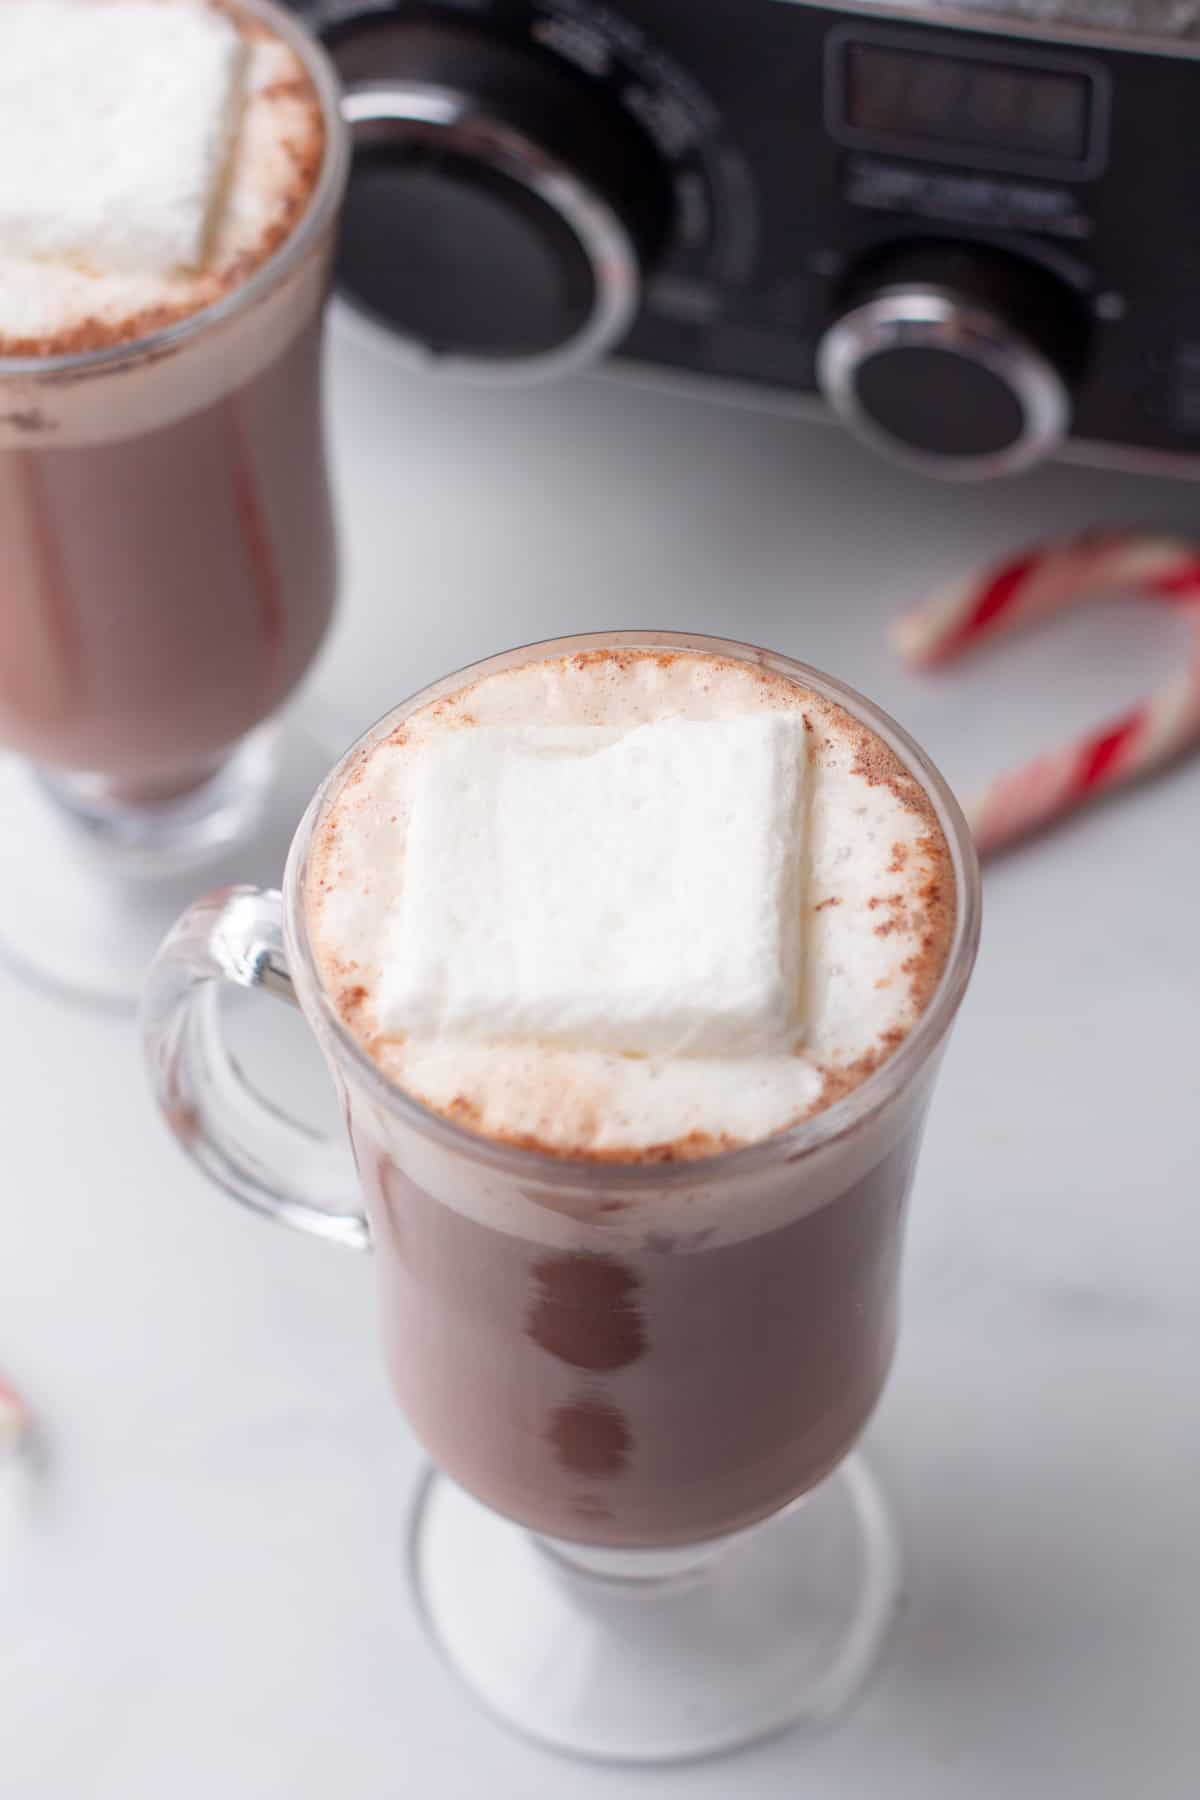 Two glasses of hot chocolate with marshmallows and candy canes.